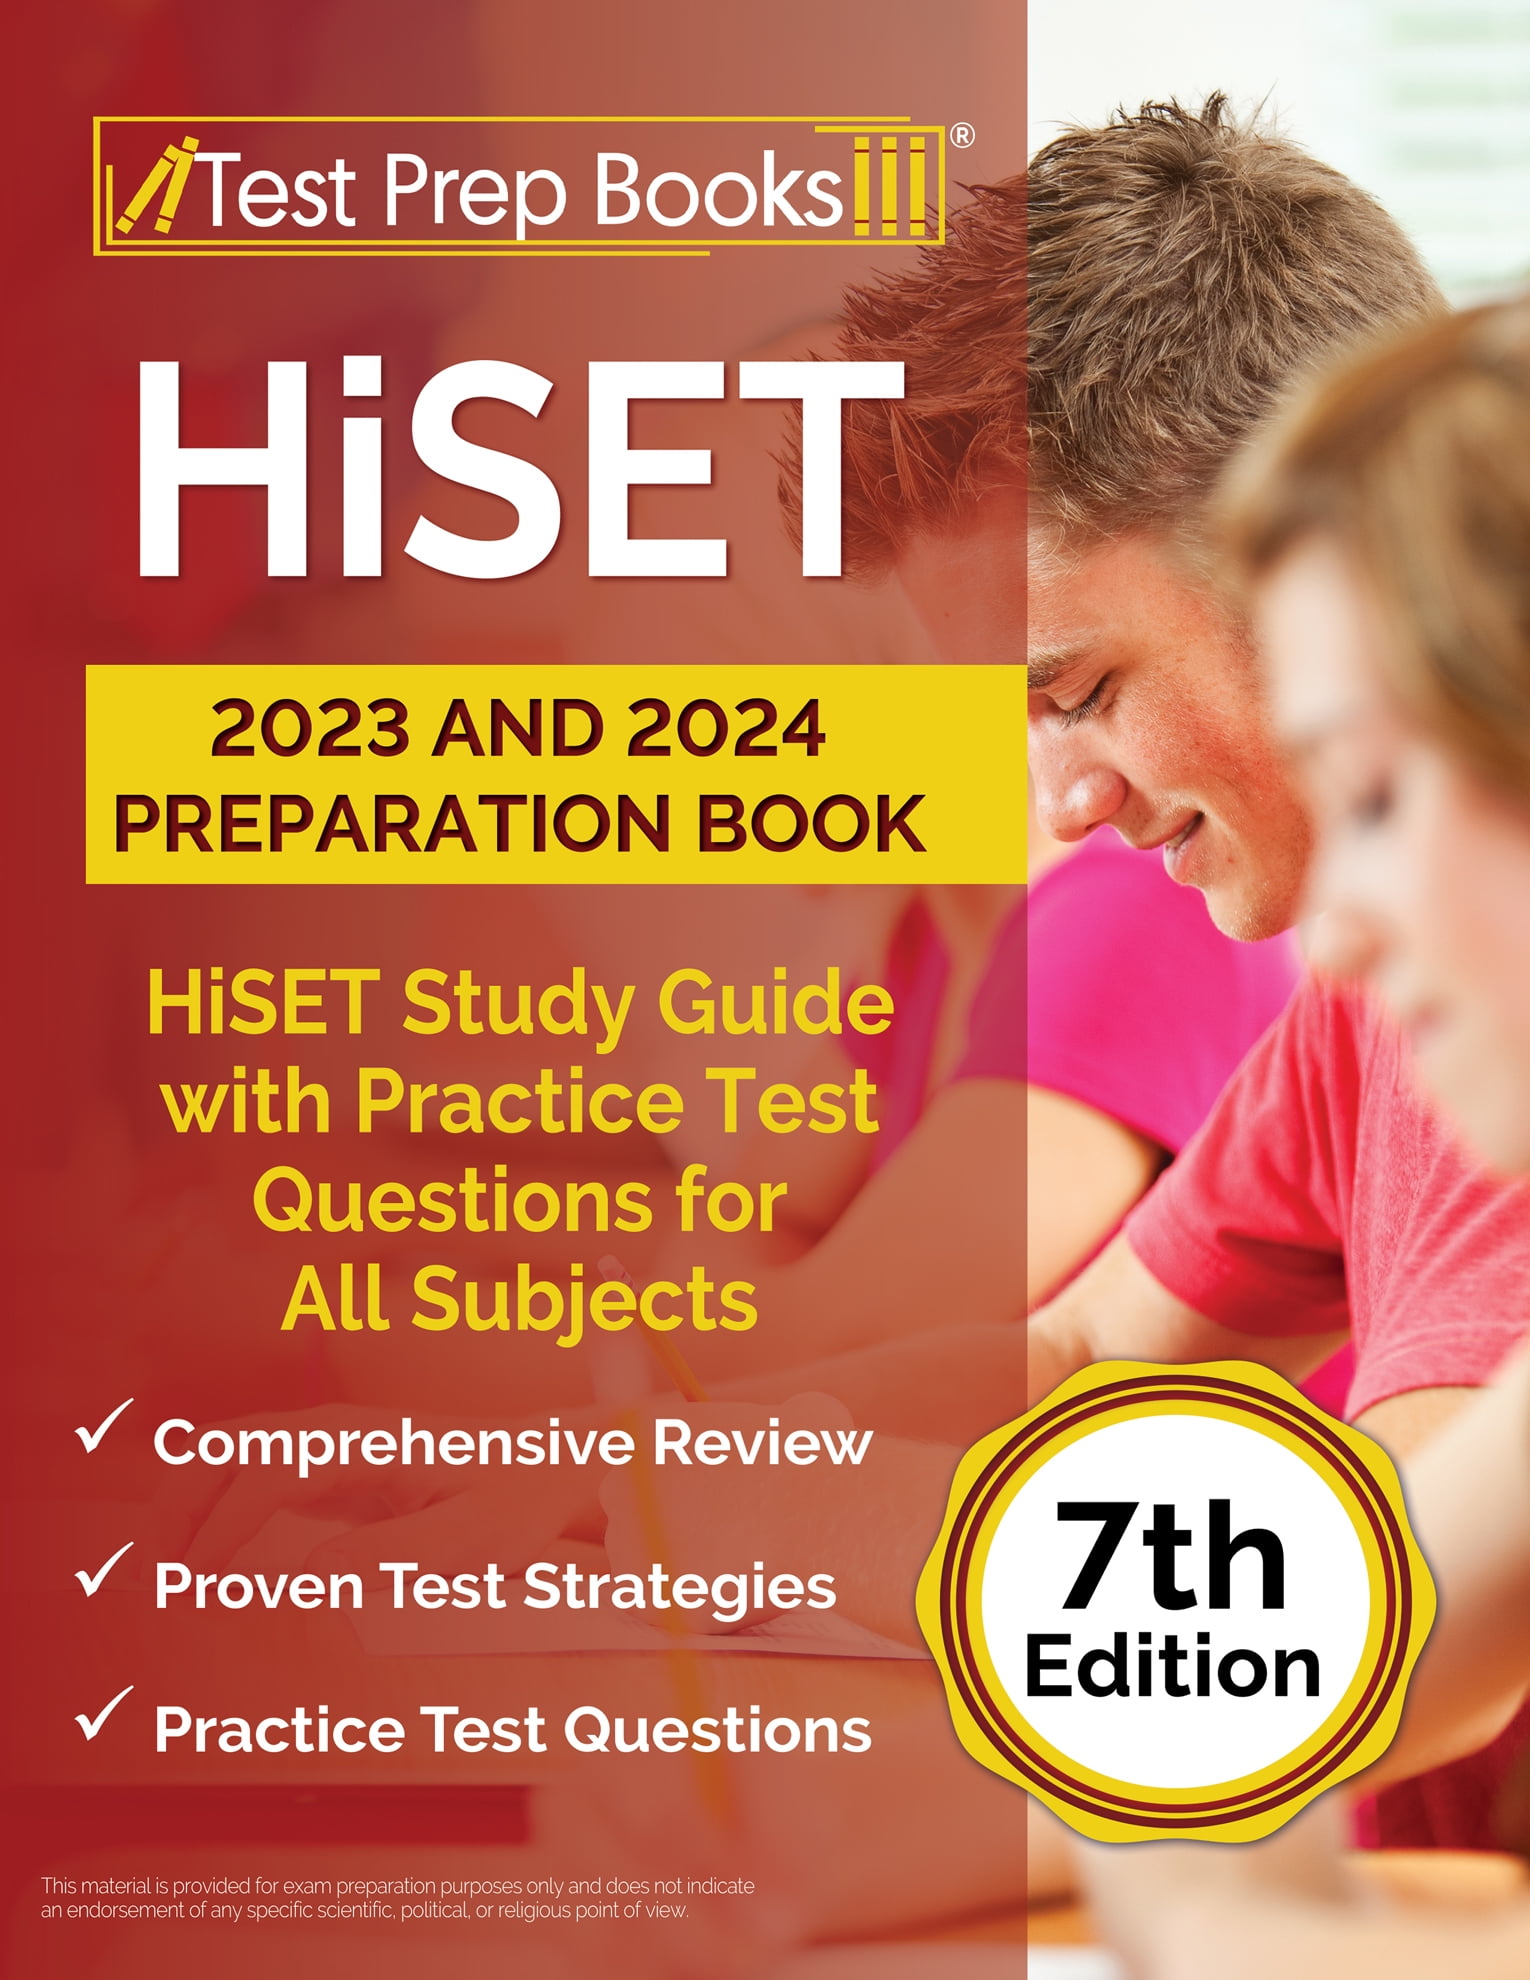 HiSET 2023 and 2024 Preparation Book HiSET Study Guide with Practice